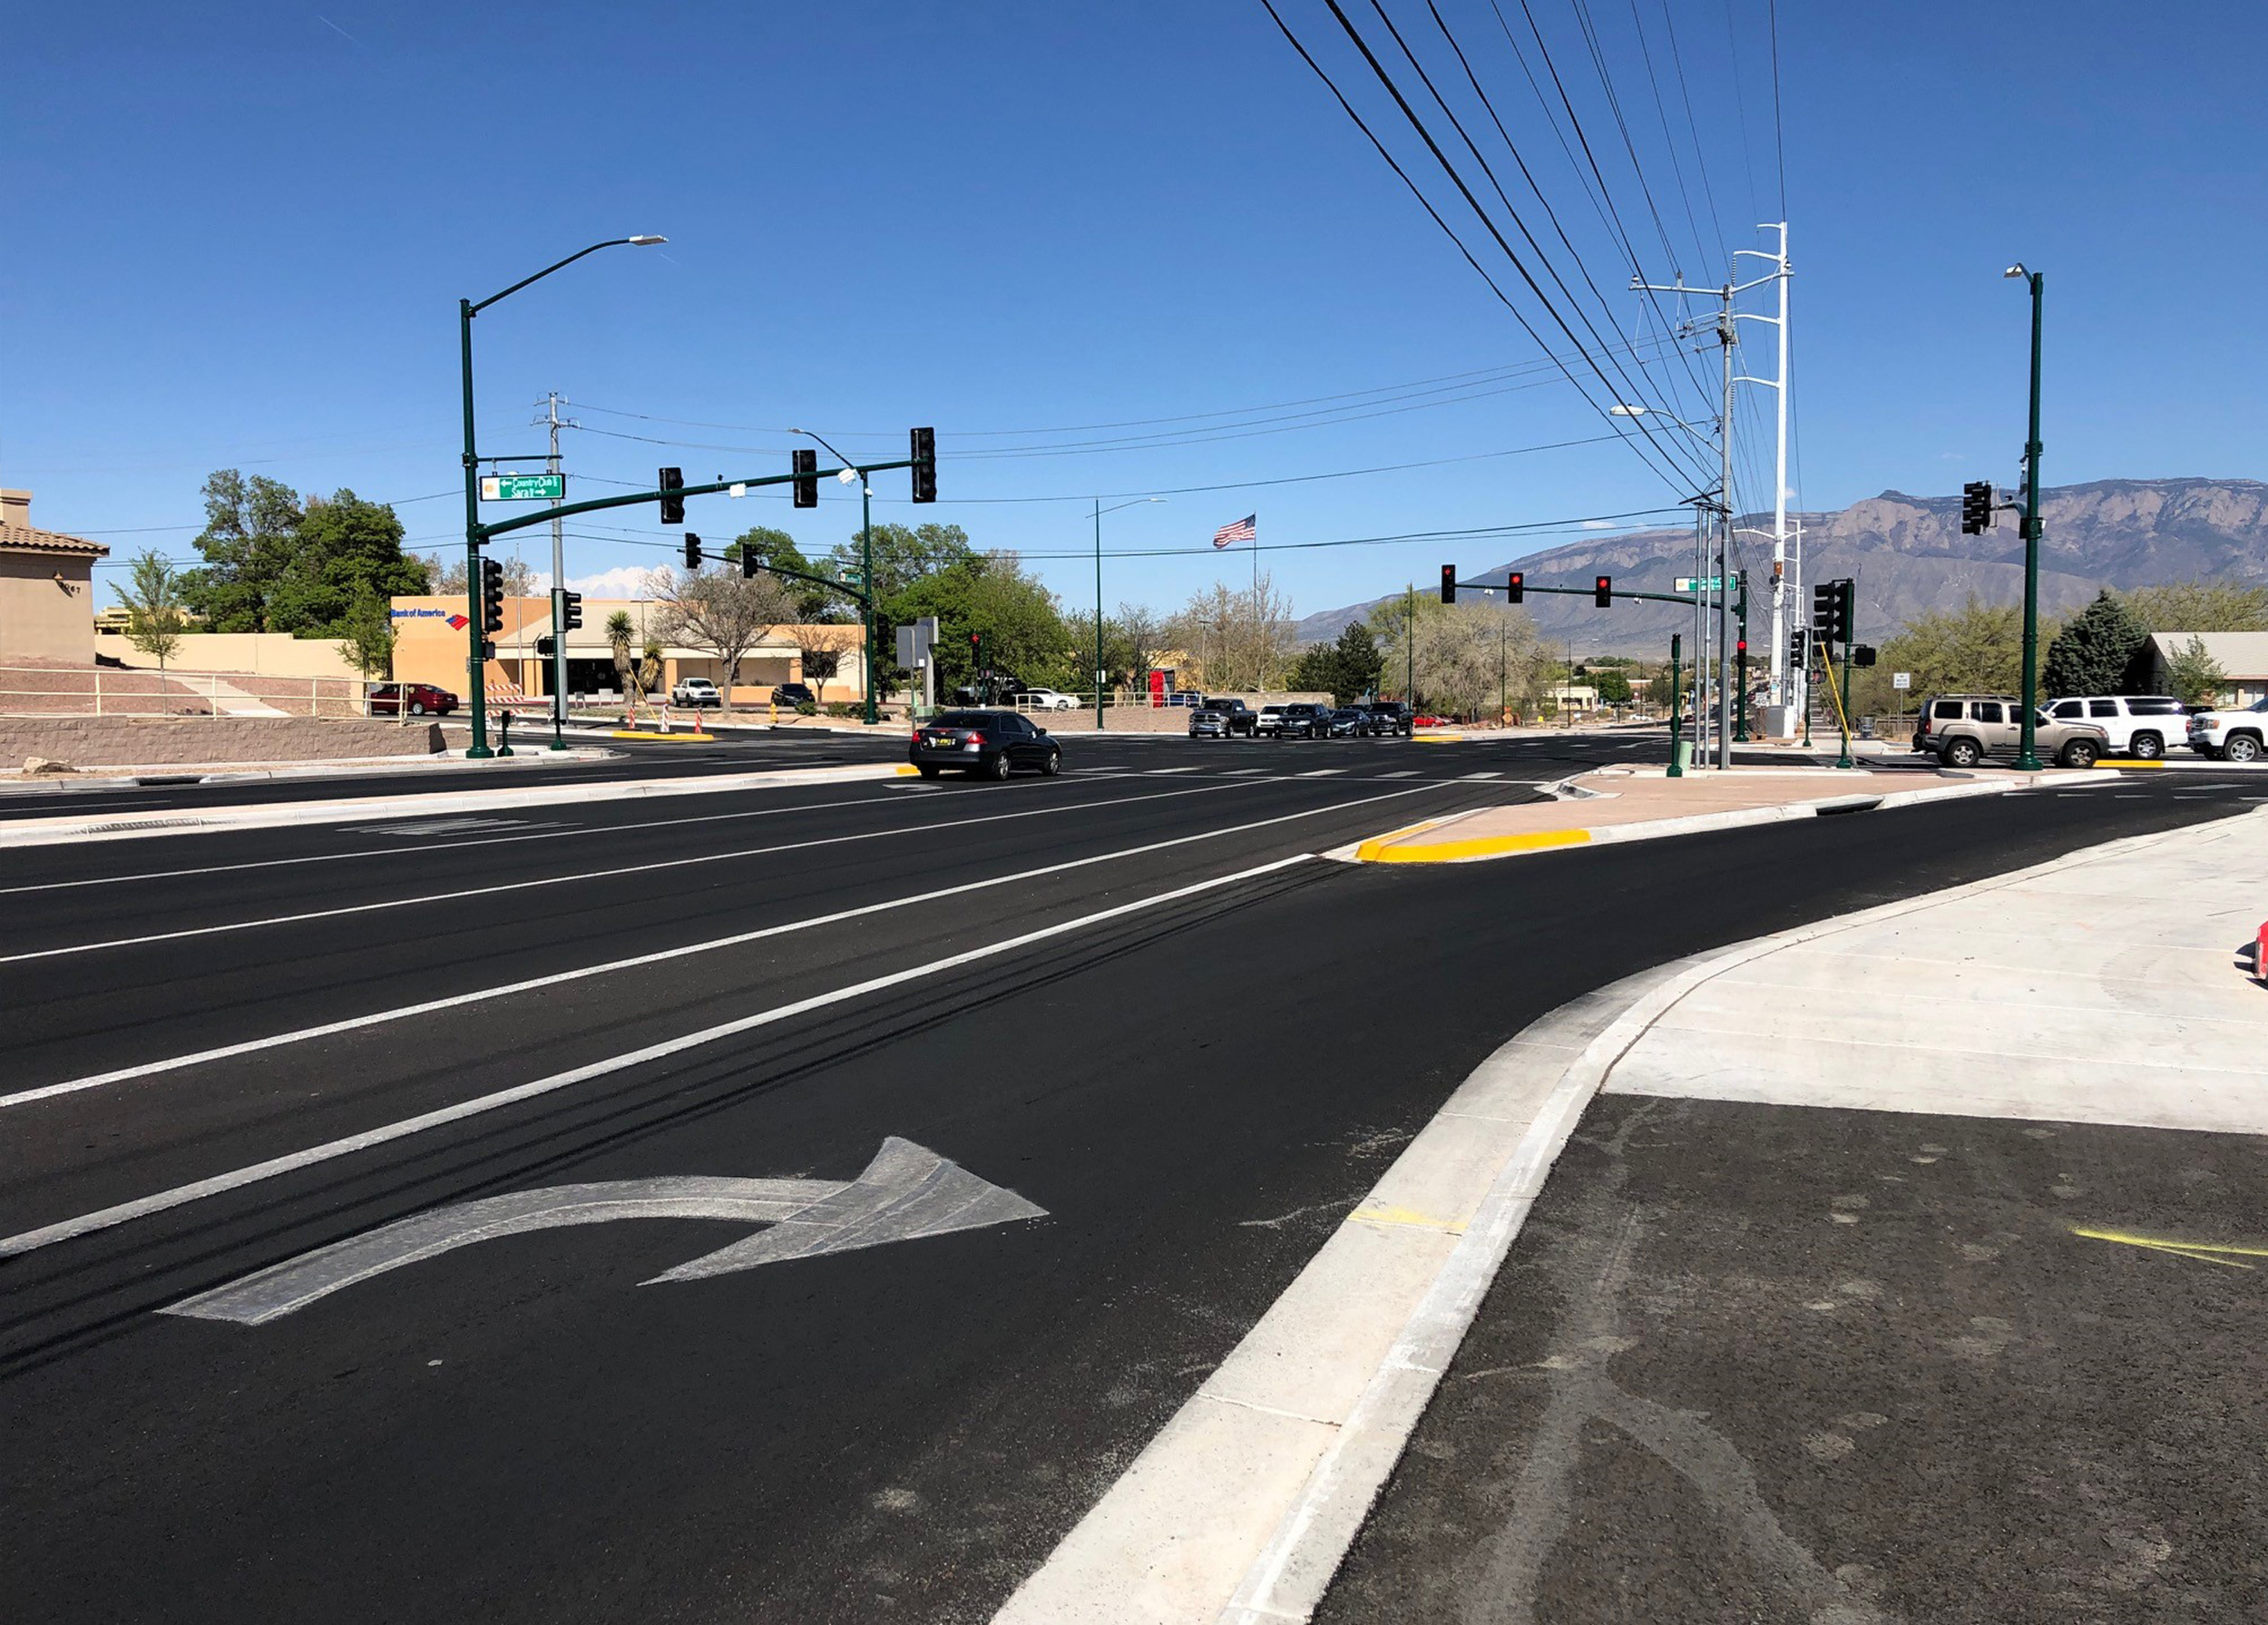 The project improvements included a new multi-use trail, bike lanes, sidewalks, a new storm drain system, new signals, and an interconnect system.